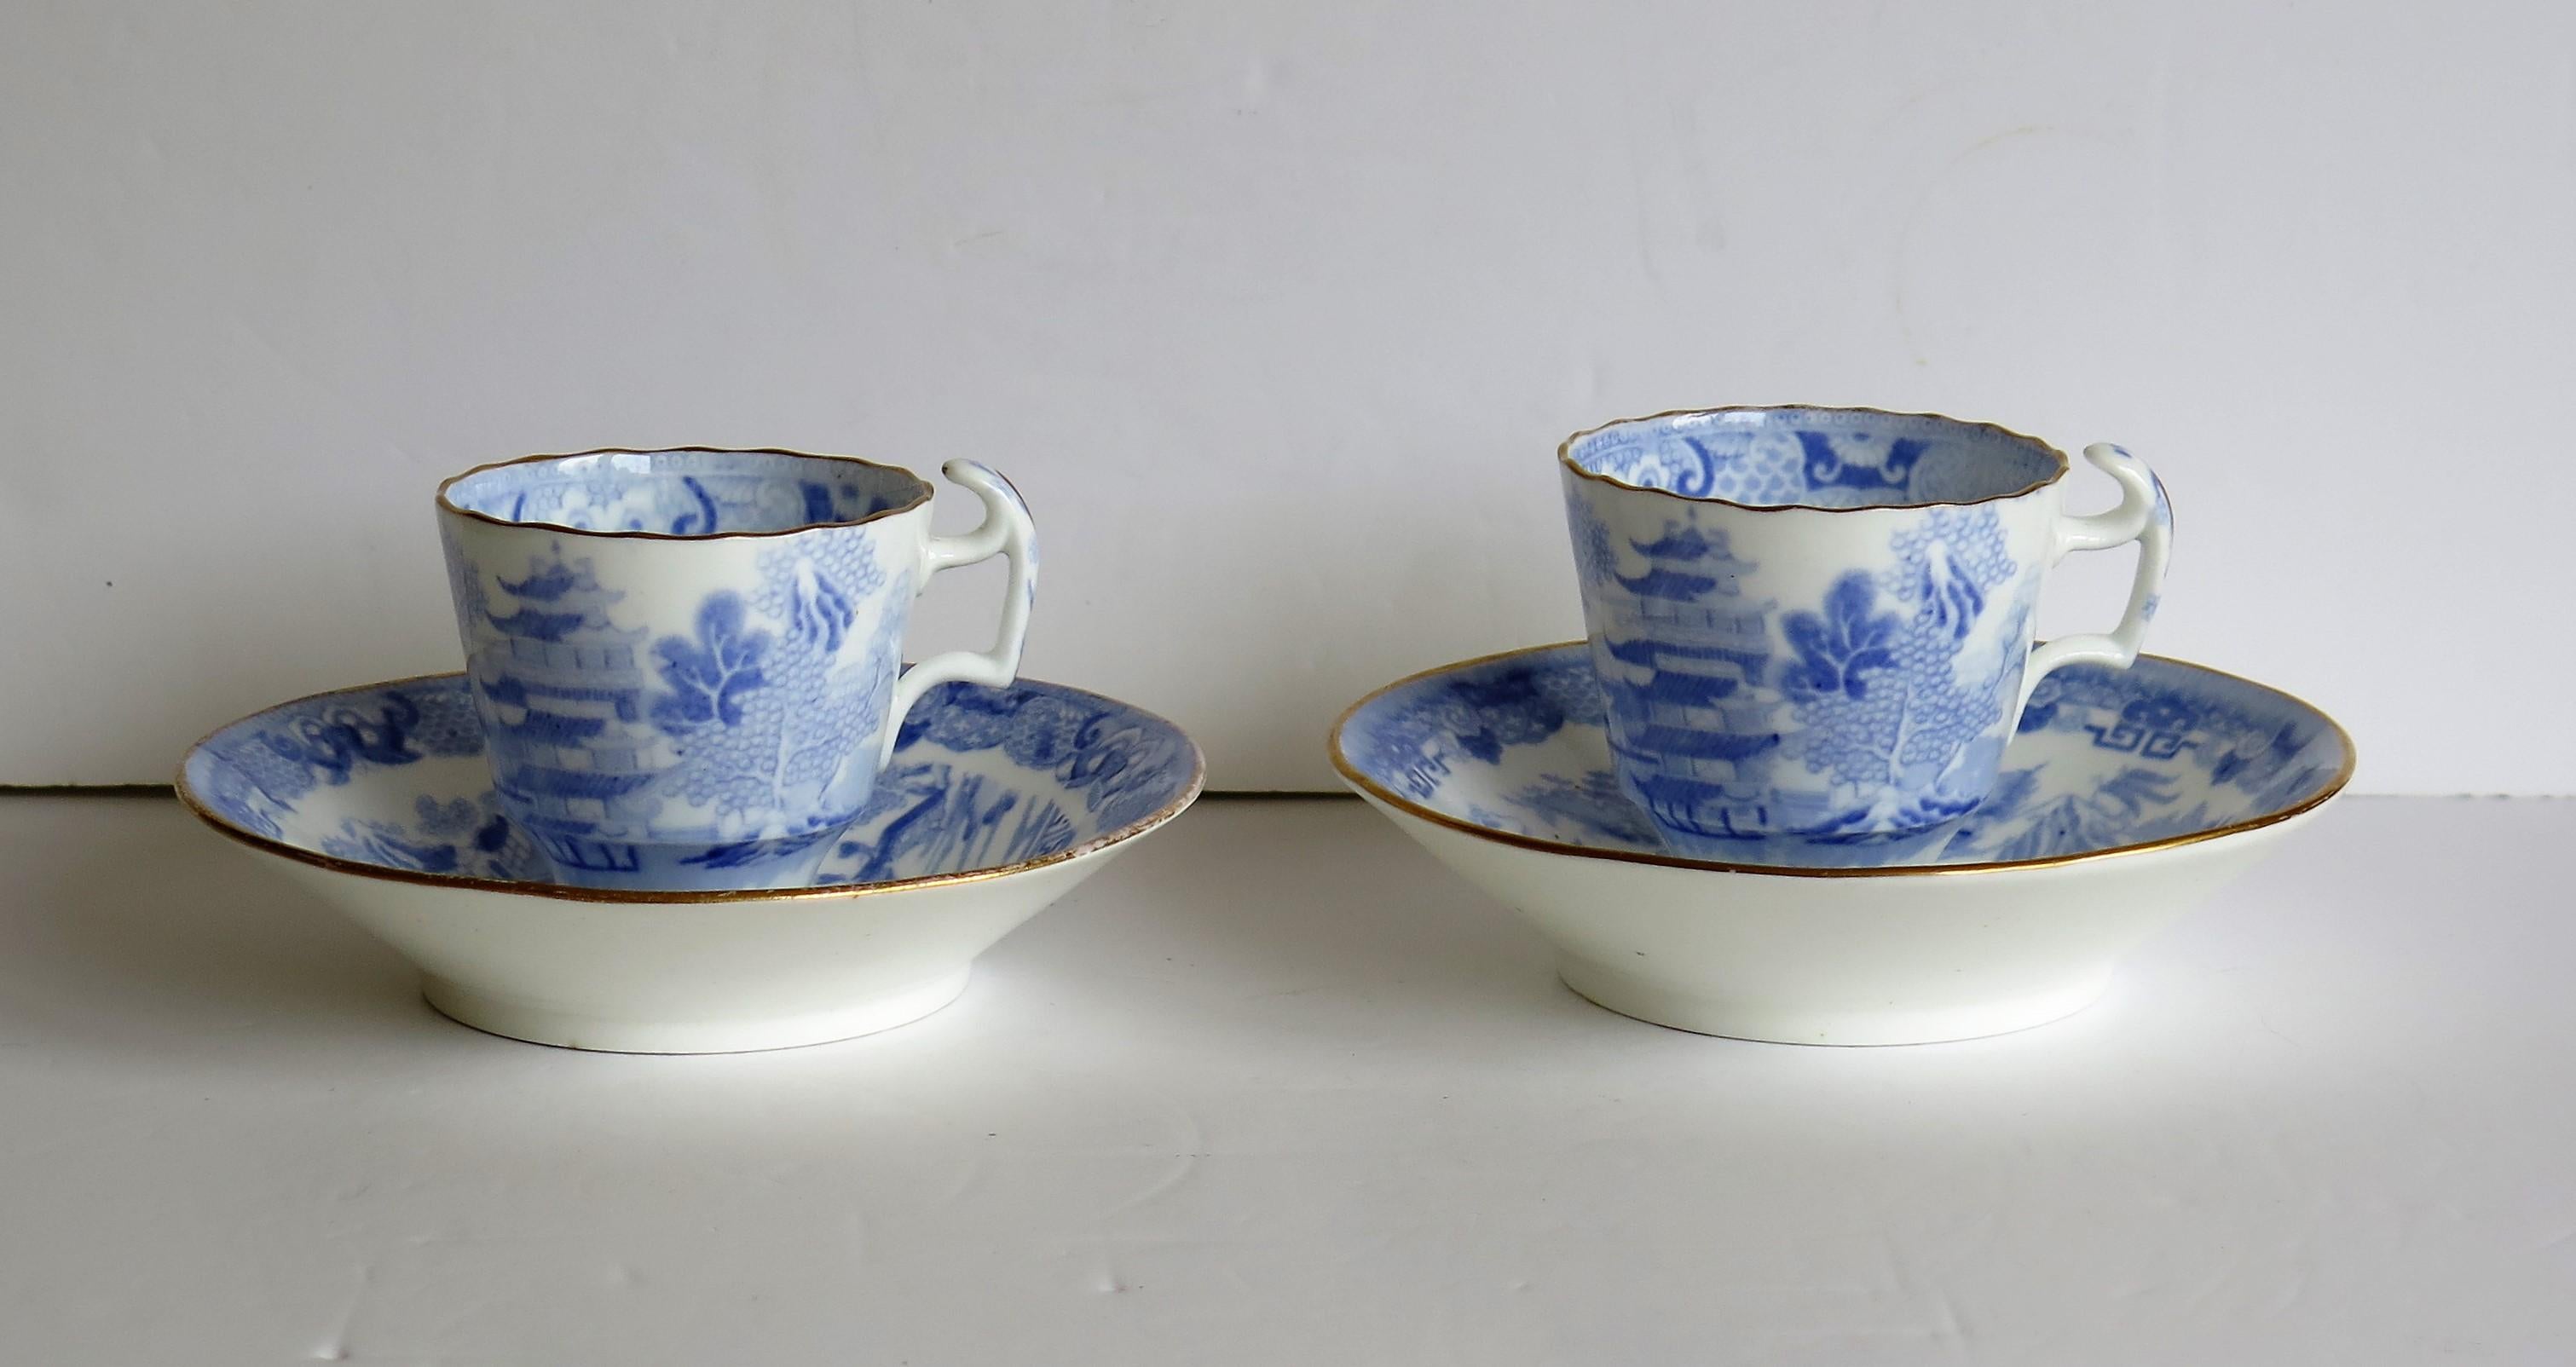 19th Century Miles Mason Porcelain Pair of Cups & Saucers Blue Broseley Willow Ptn circa 1815